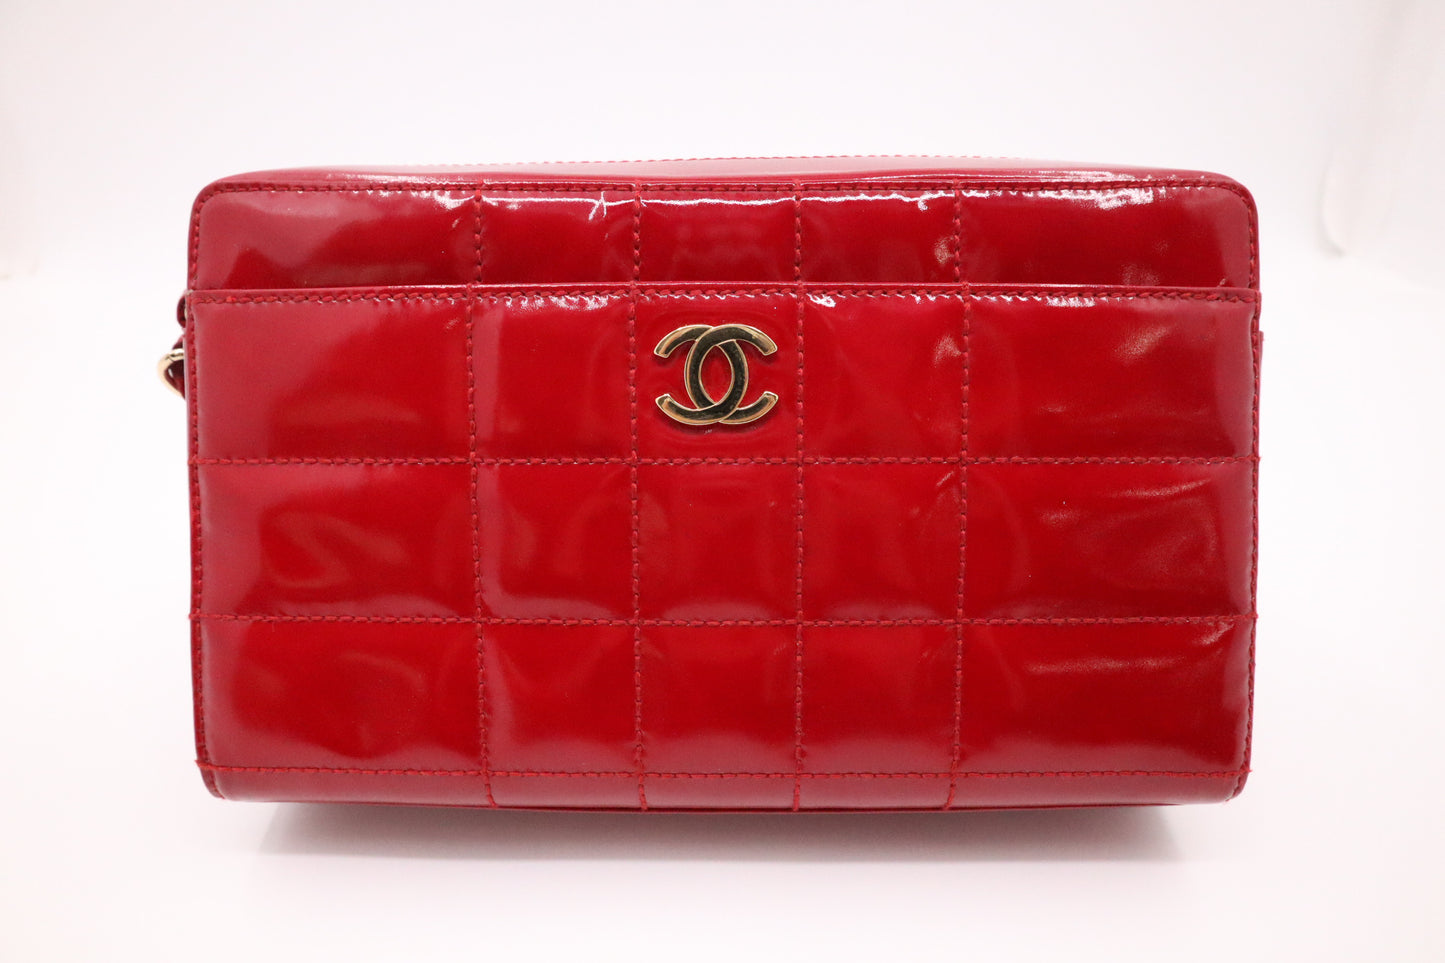 Chanel Camera Bag in Red Patent Leather